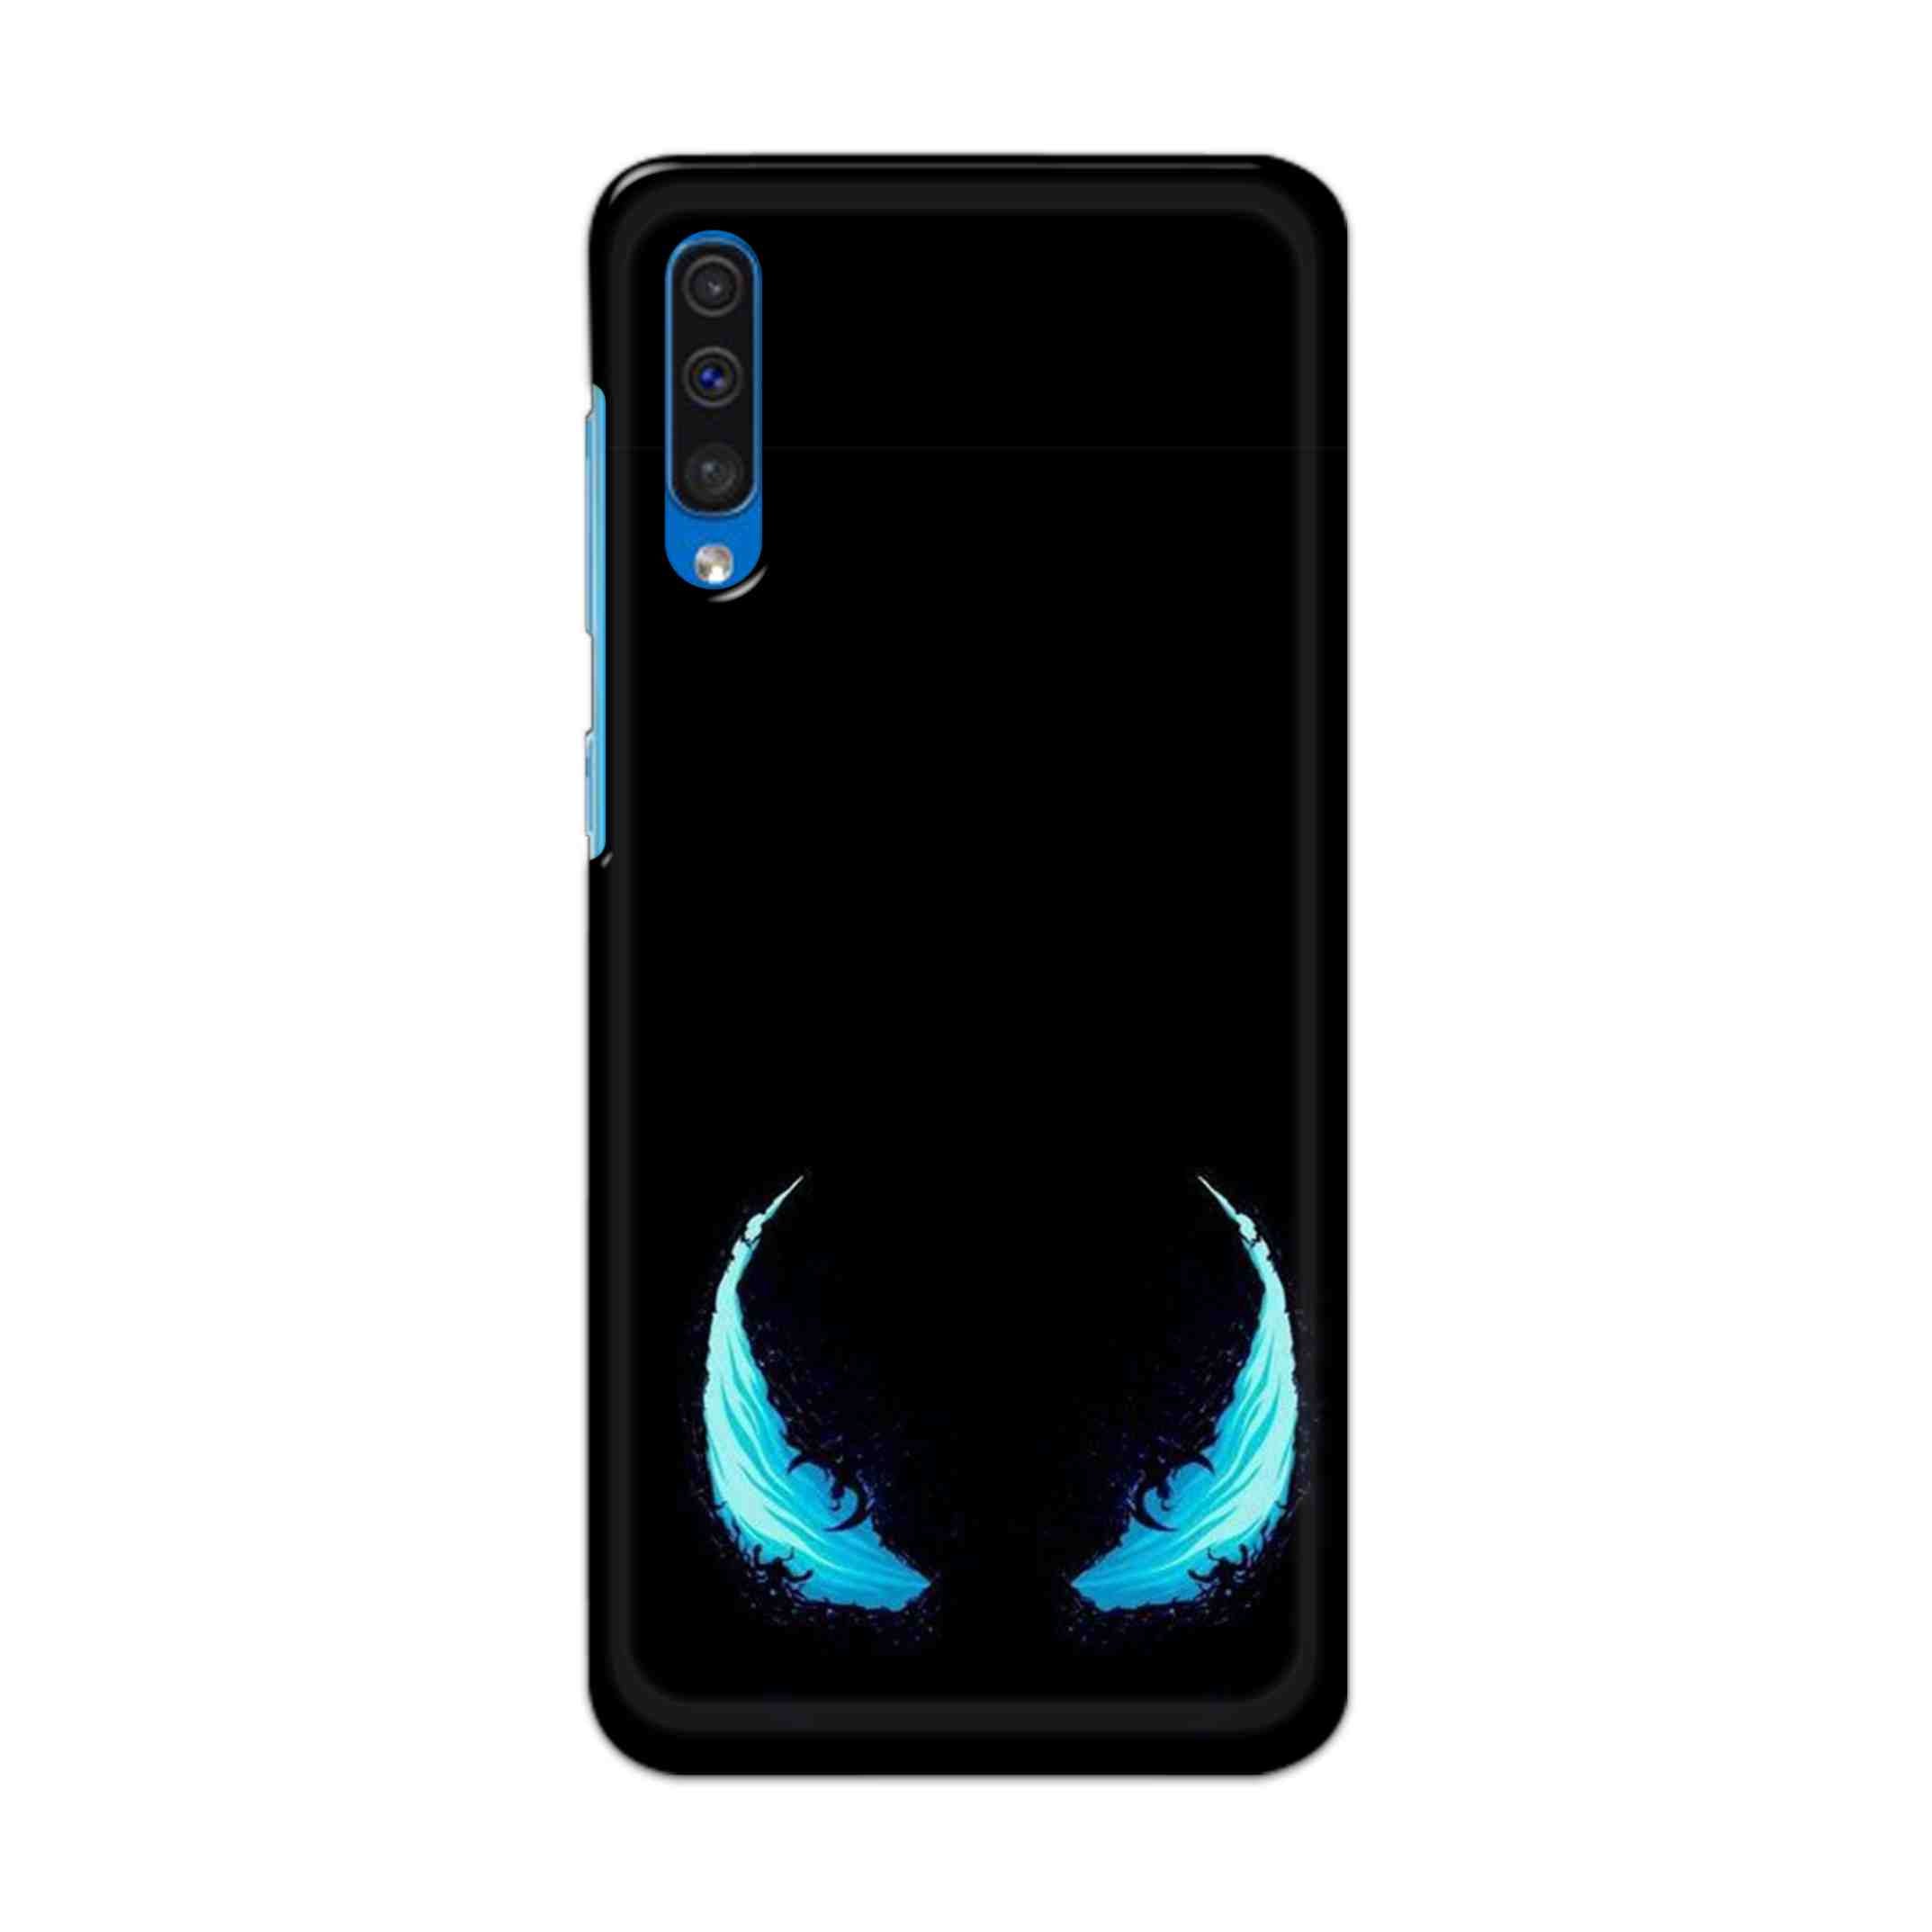 Buy Venom Eyes Hard Back Mobile Phone Case Cover For Samsung Galaxy A50 / A50s / A30s Online